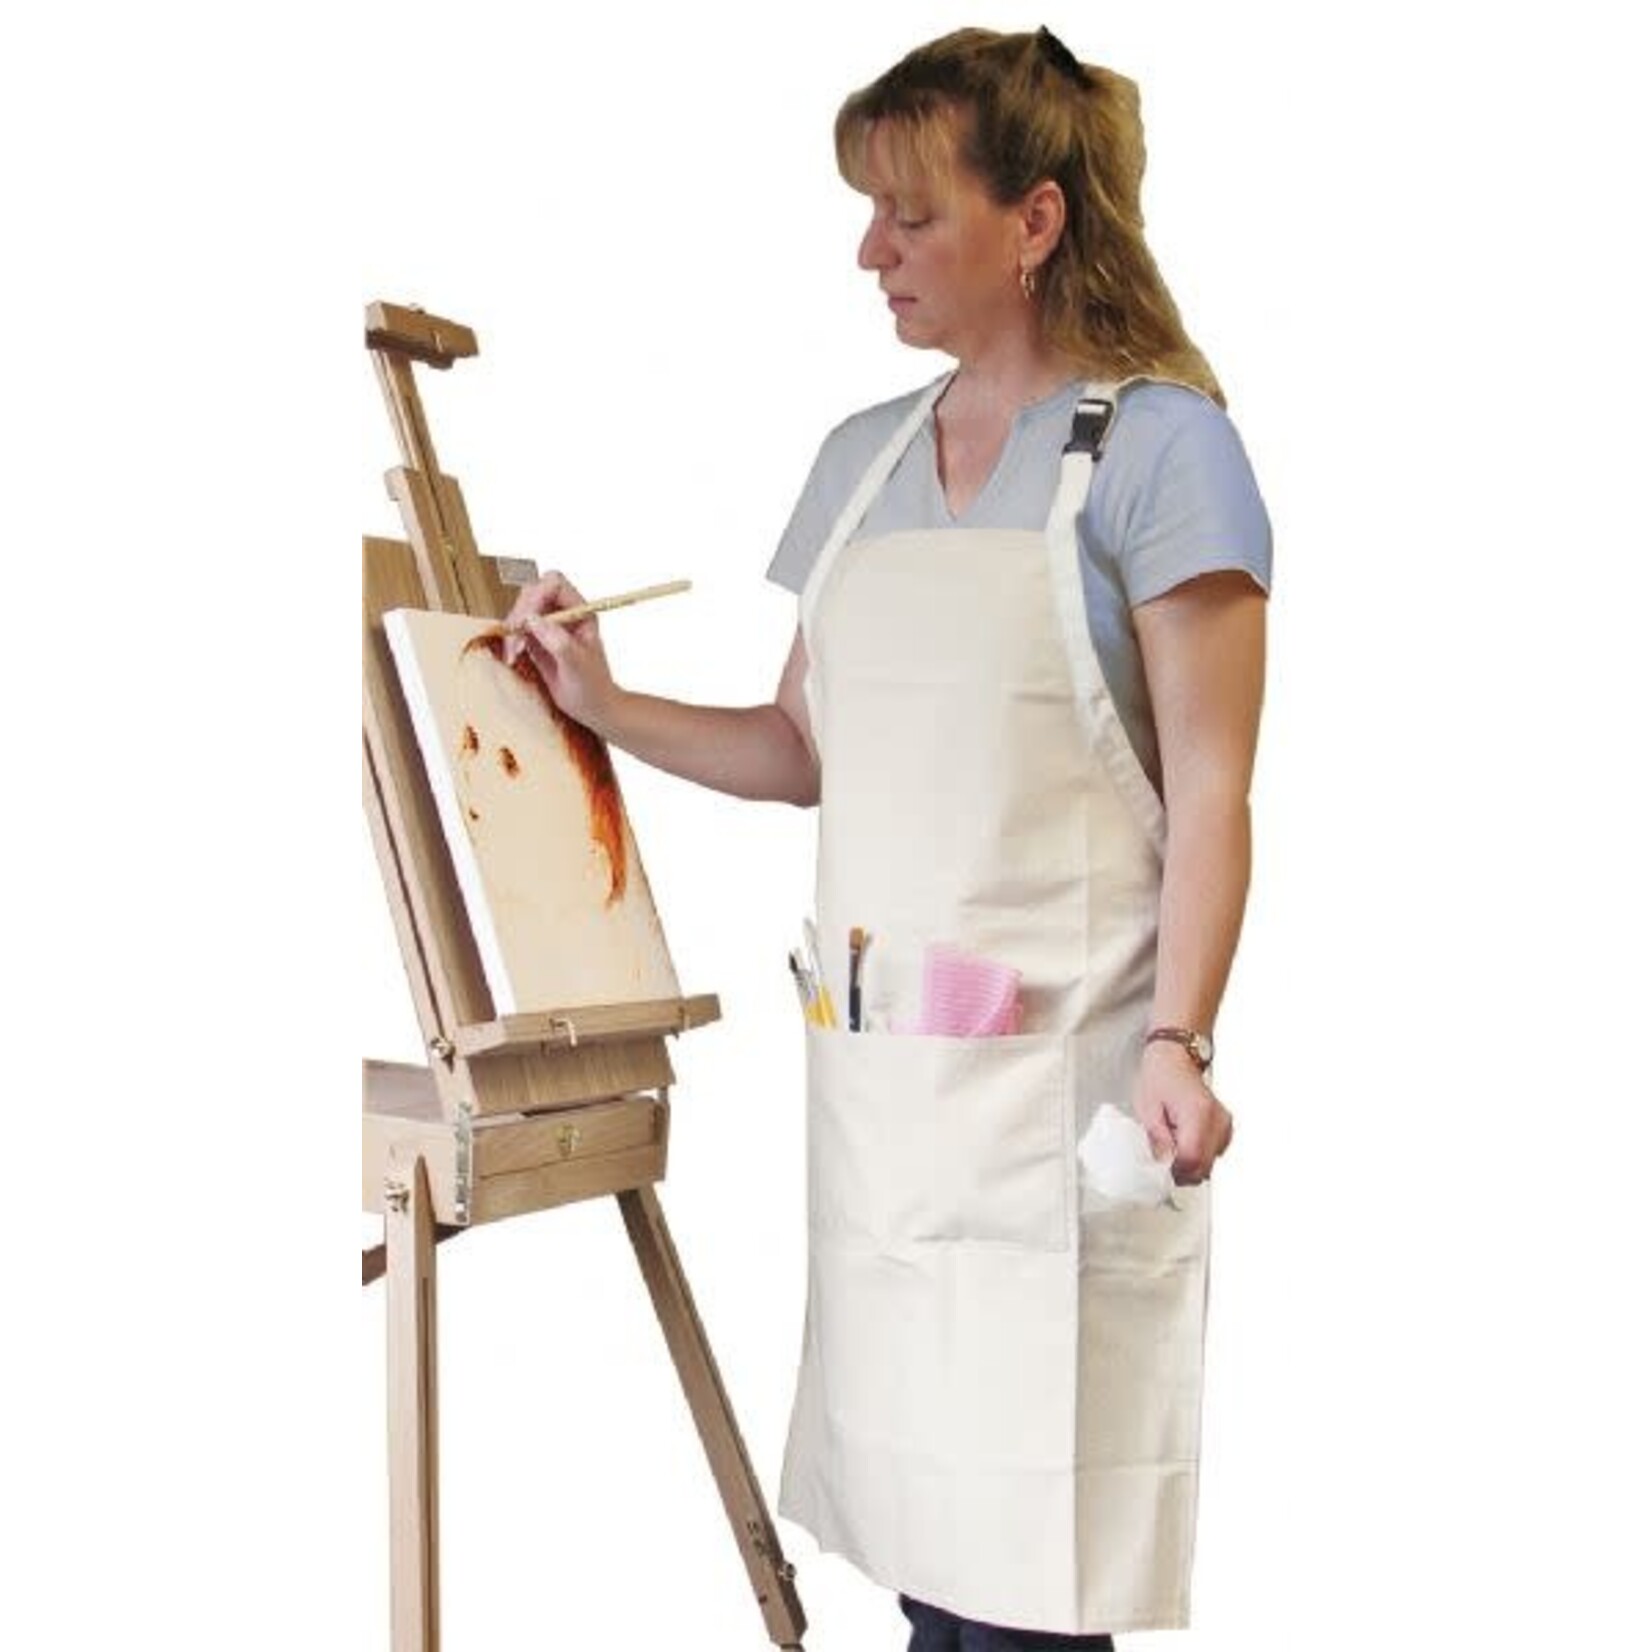 Heritage Arts Extra Large Adult Natural Canvas Artist Apron